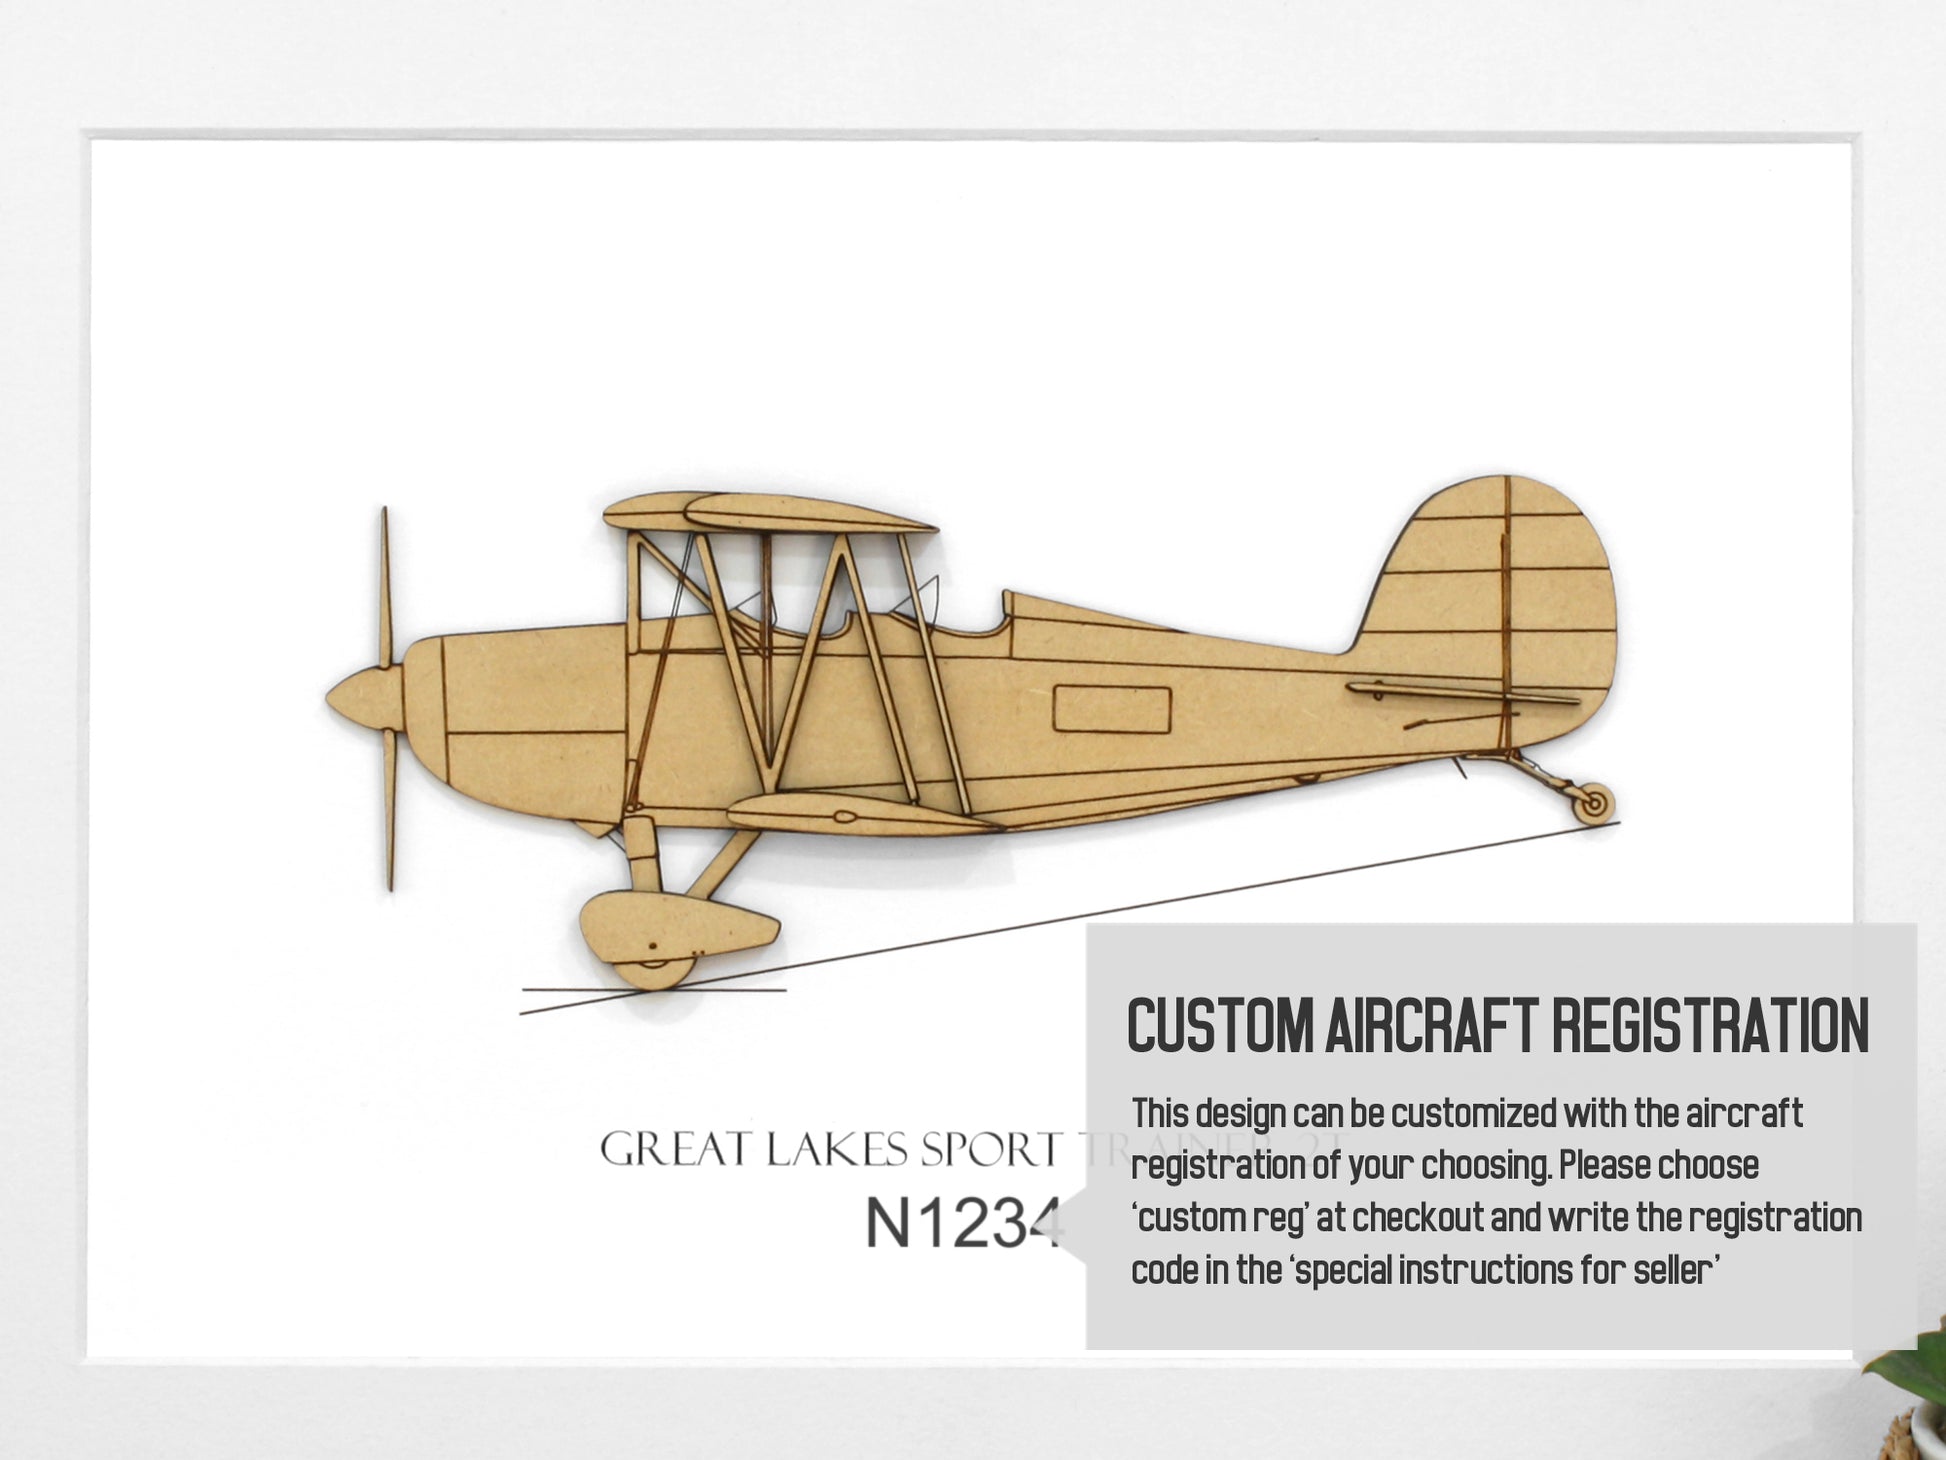 Great Lakes 2T biplane aviation gifts